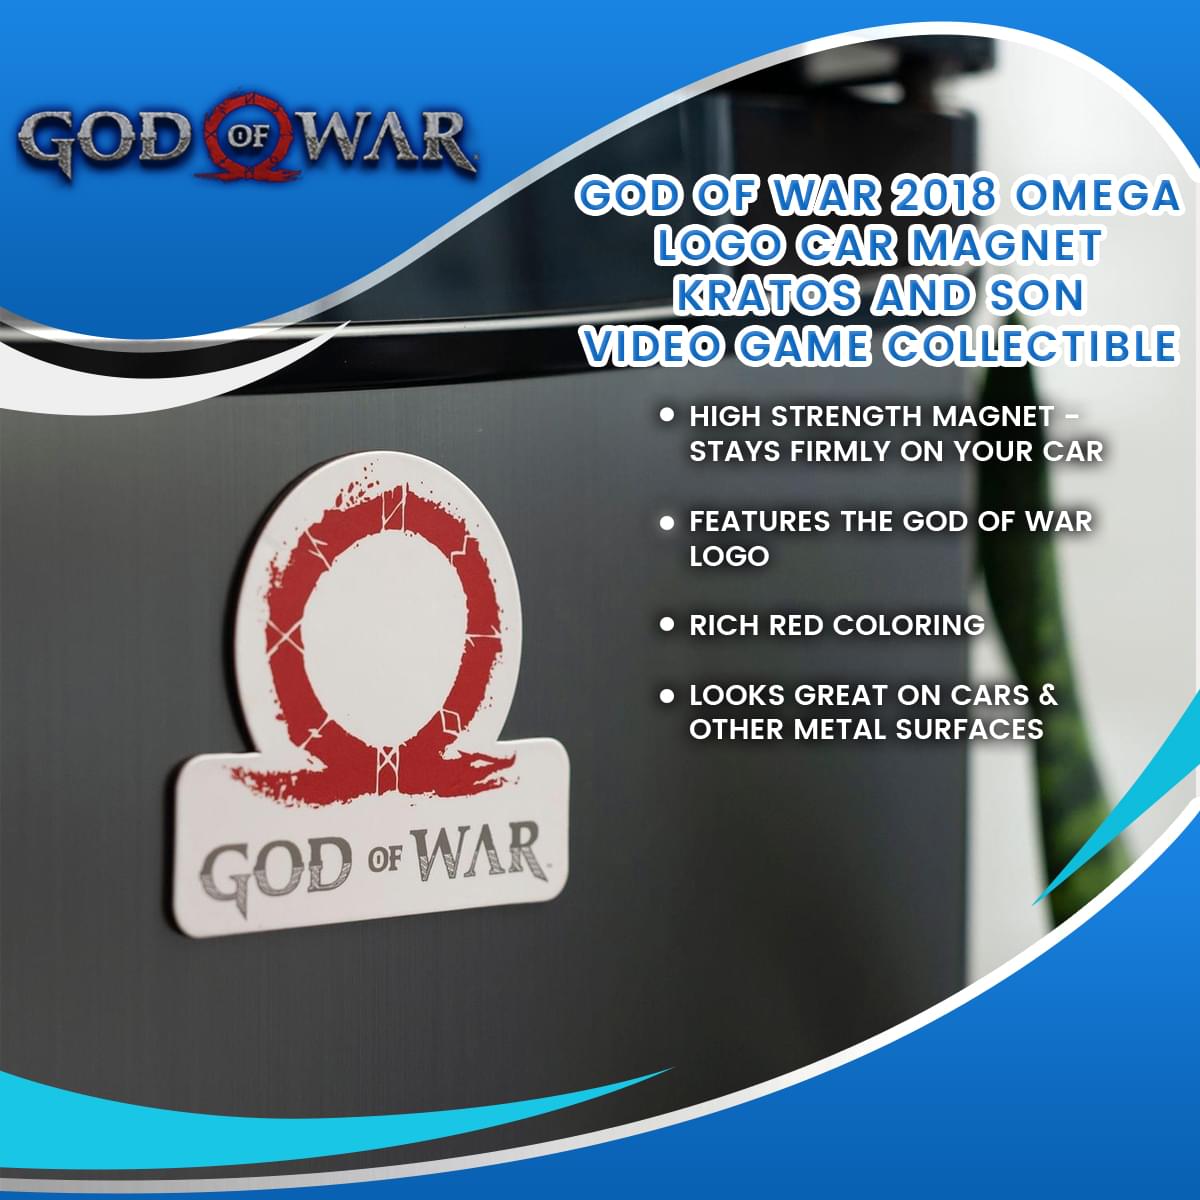 God of War 2018 Omega Logo Car Magnet | Kratos And Son | Video Game Collectible